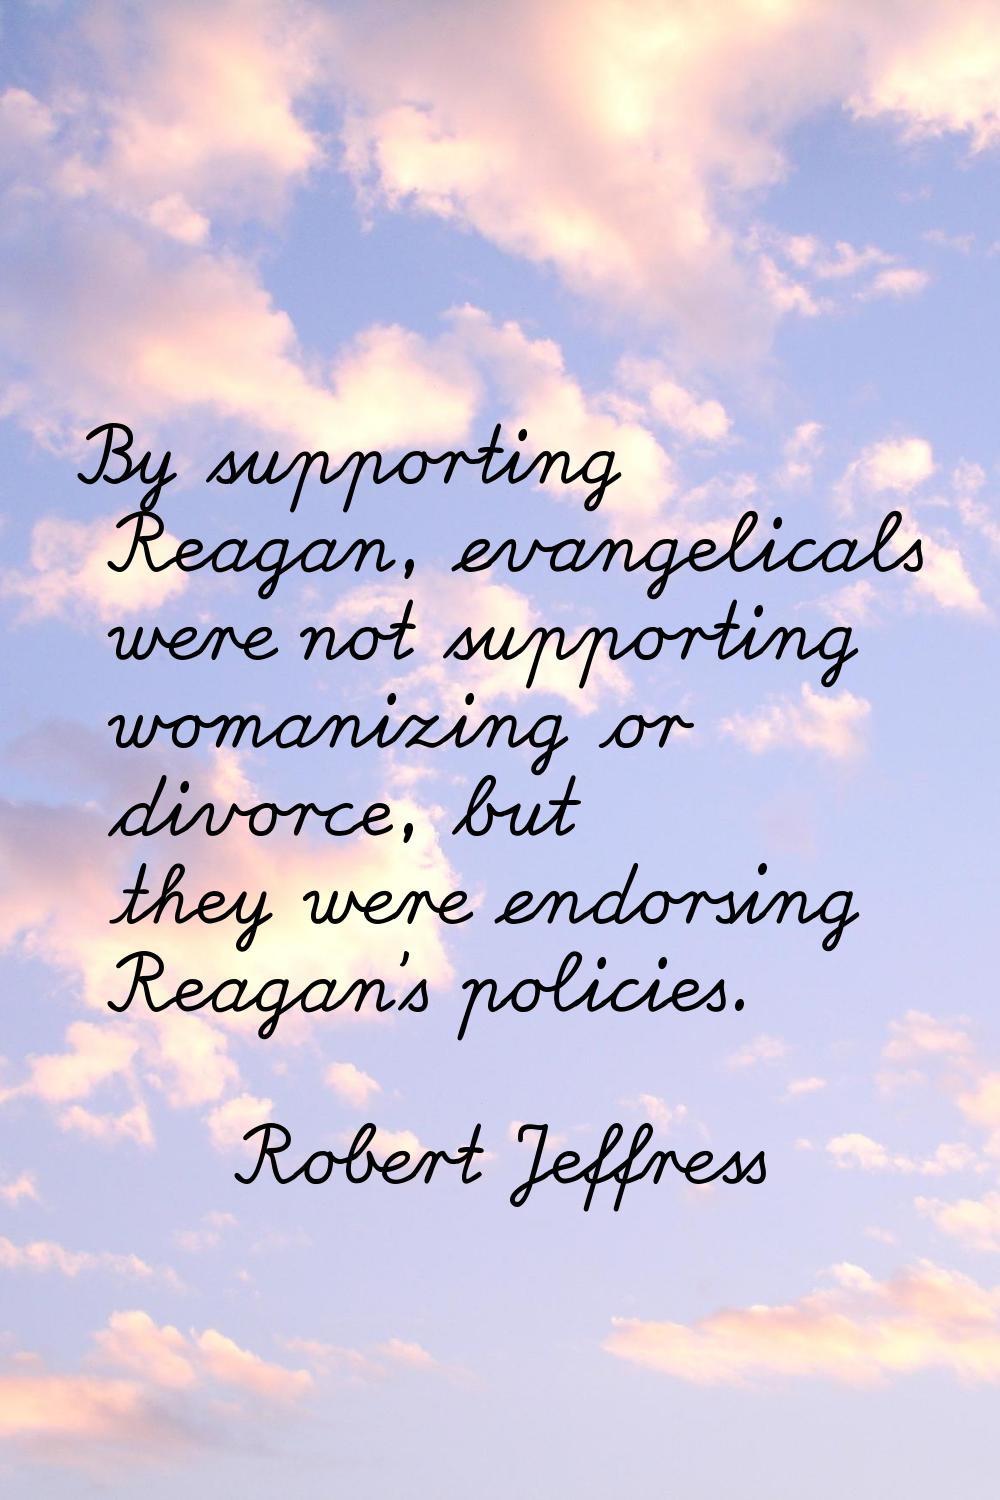 By supporting Reagan, evangelicals were not supporting womanizing or divorce, but they were endorsi